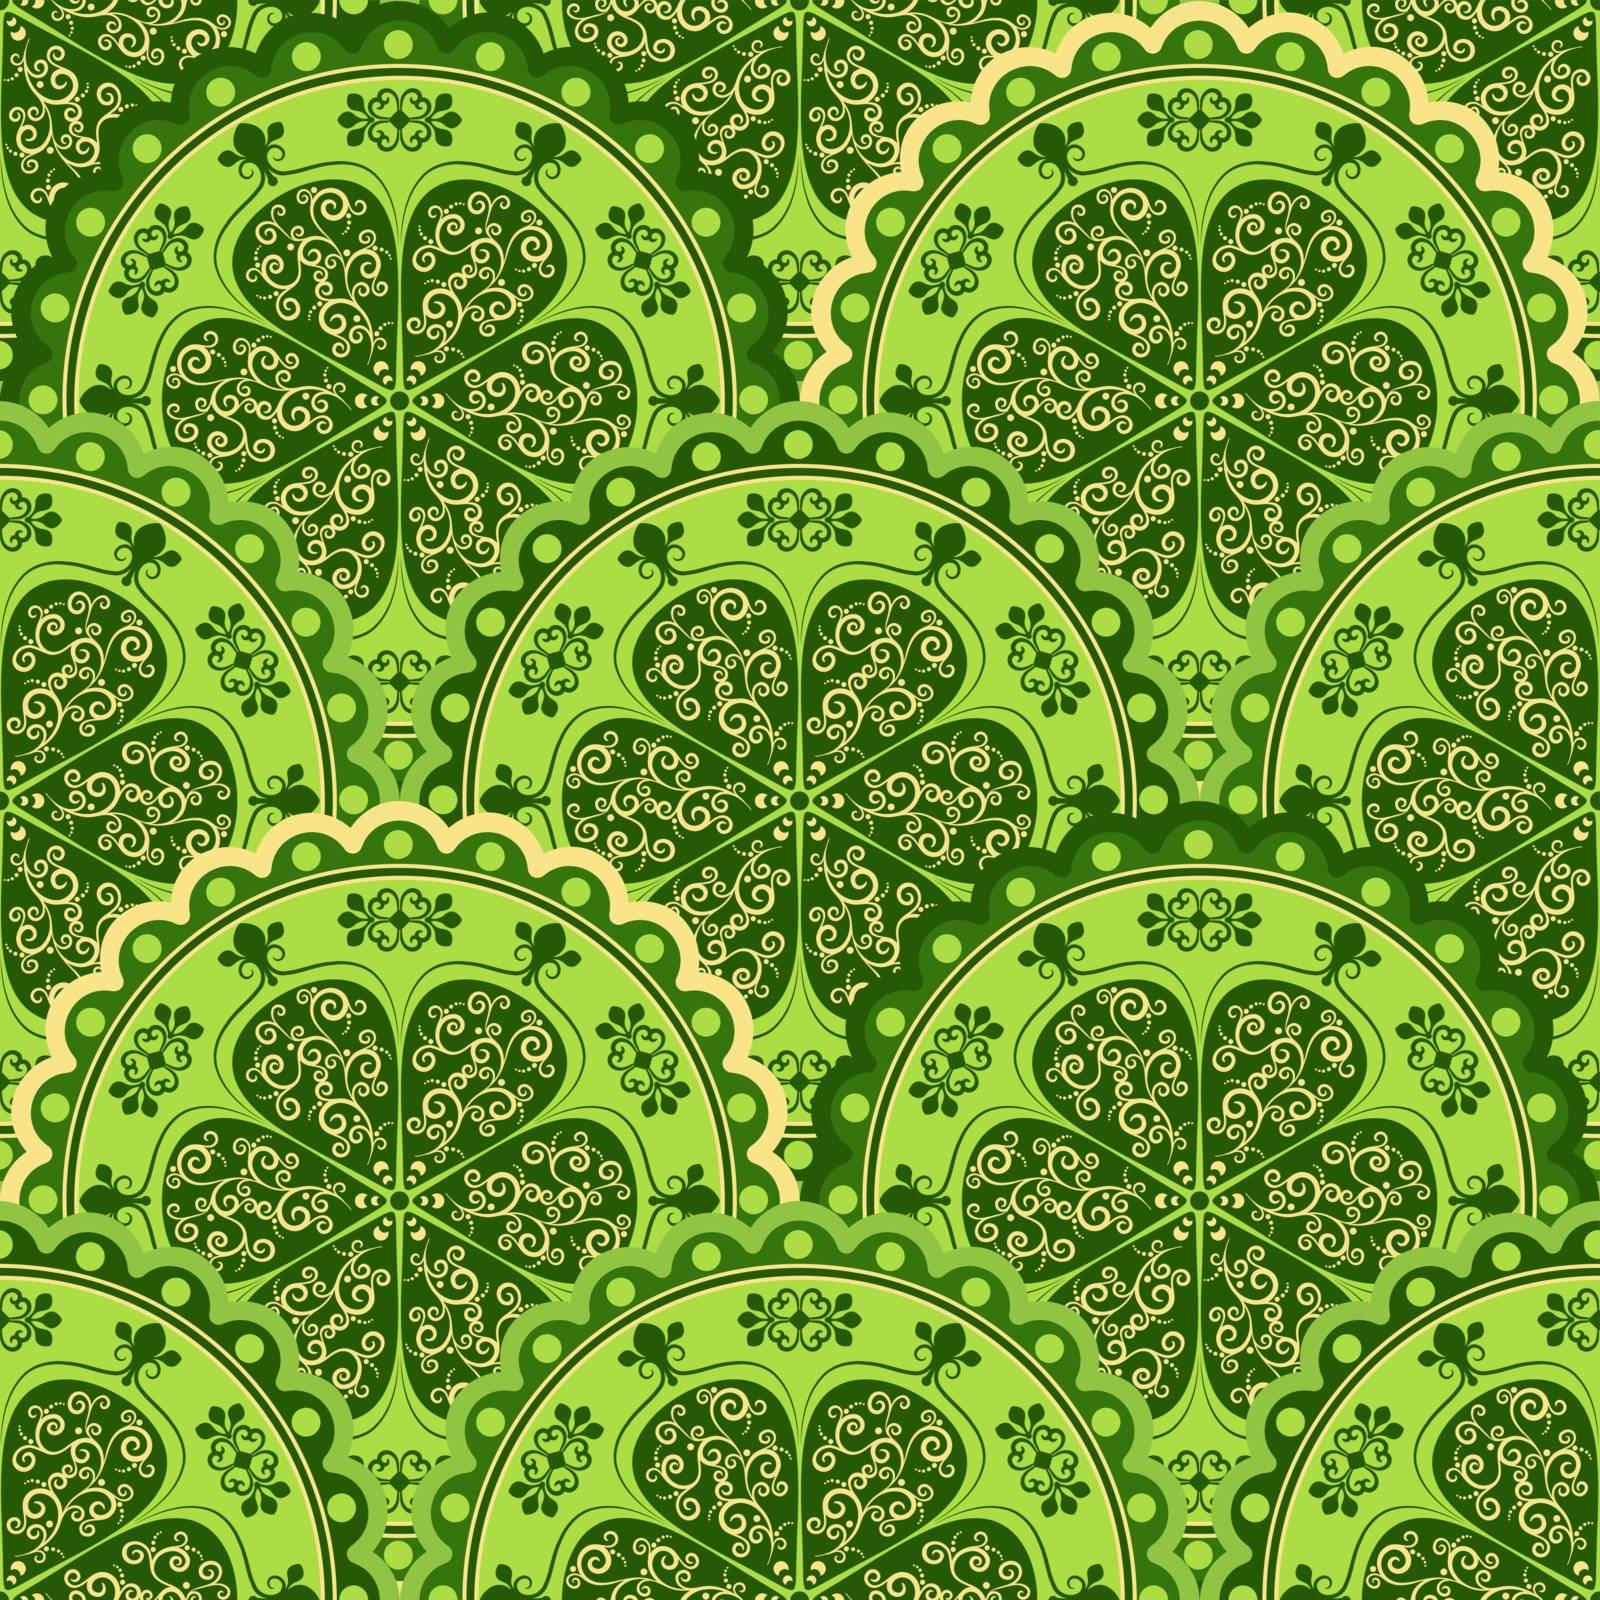  Green and yellow vintage seamless pattern with floral circles (vector)